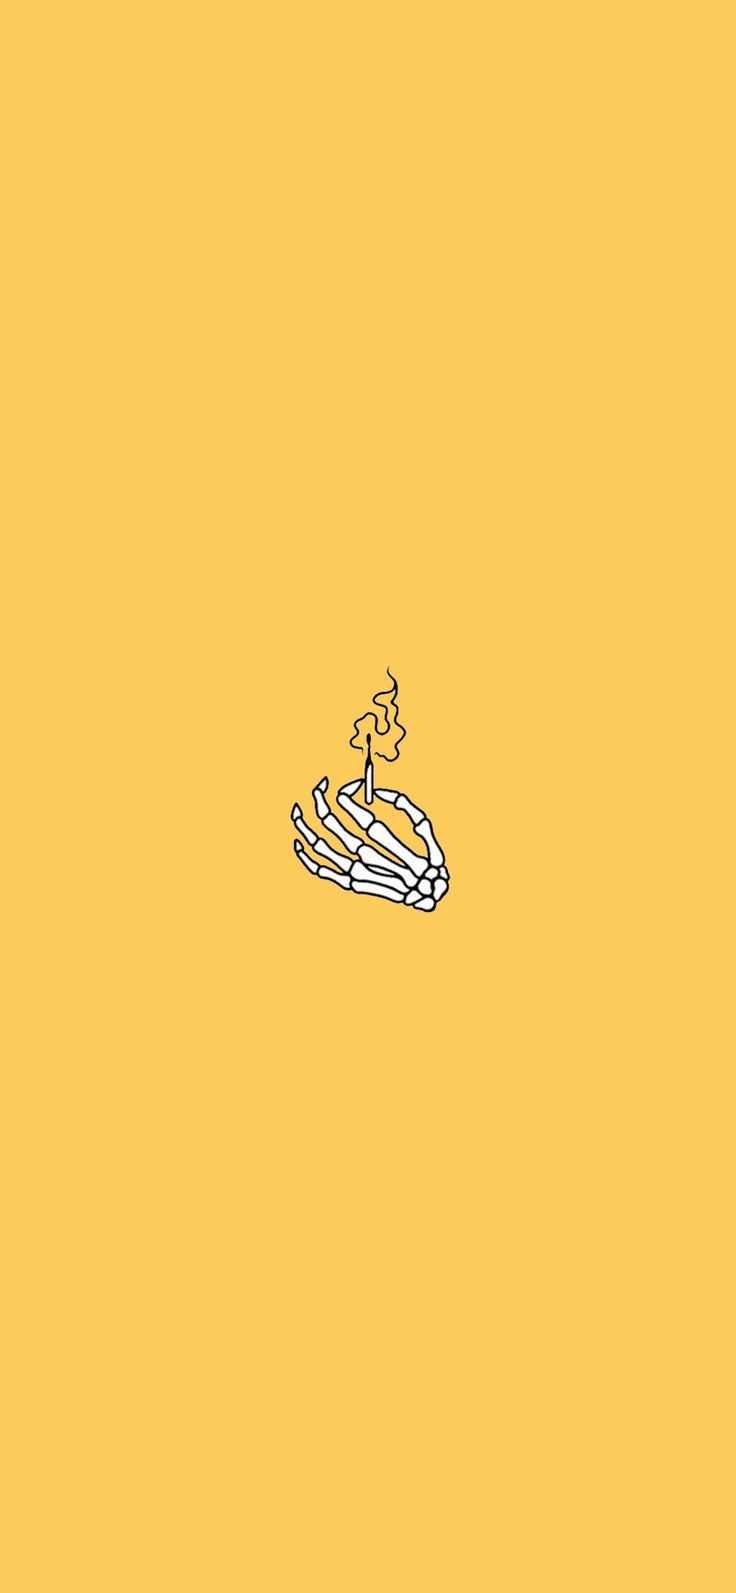 Aesthetic wallpaper of a skeleton hand holding a lit match on a yellow background - Light yellow